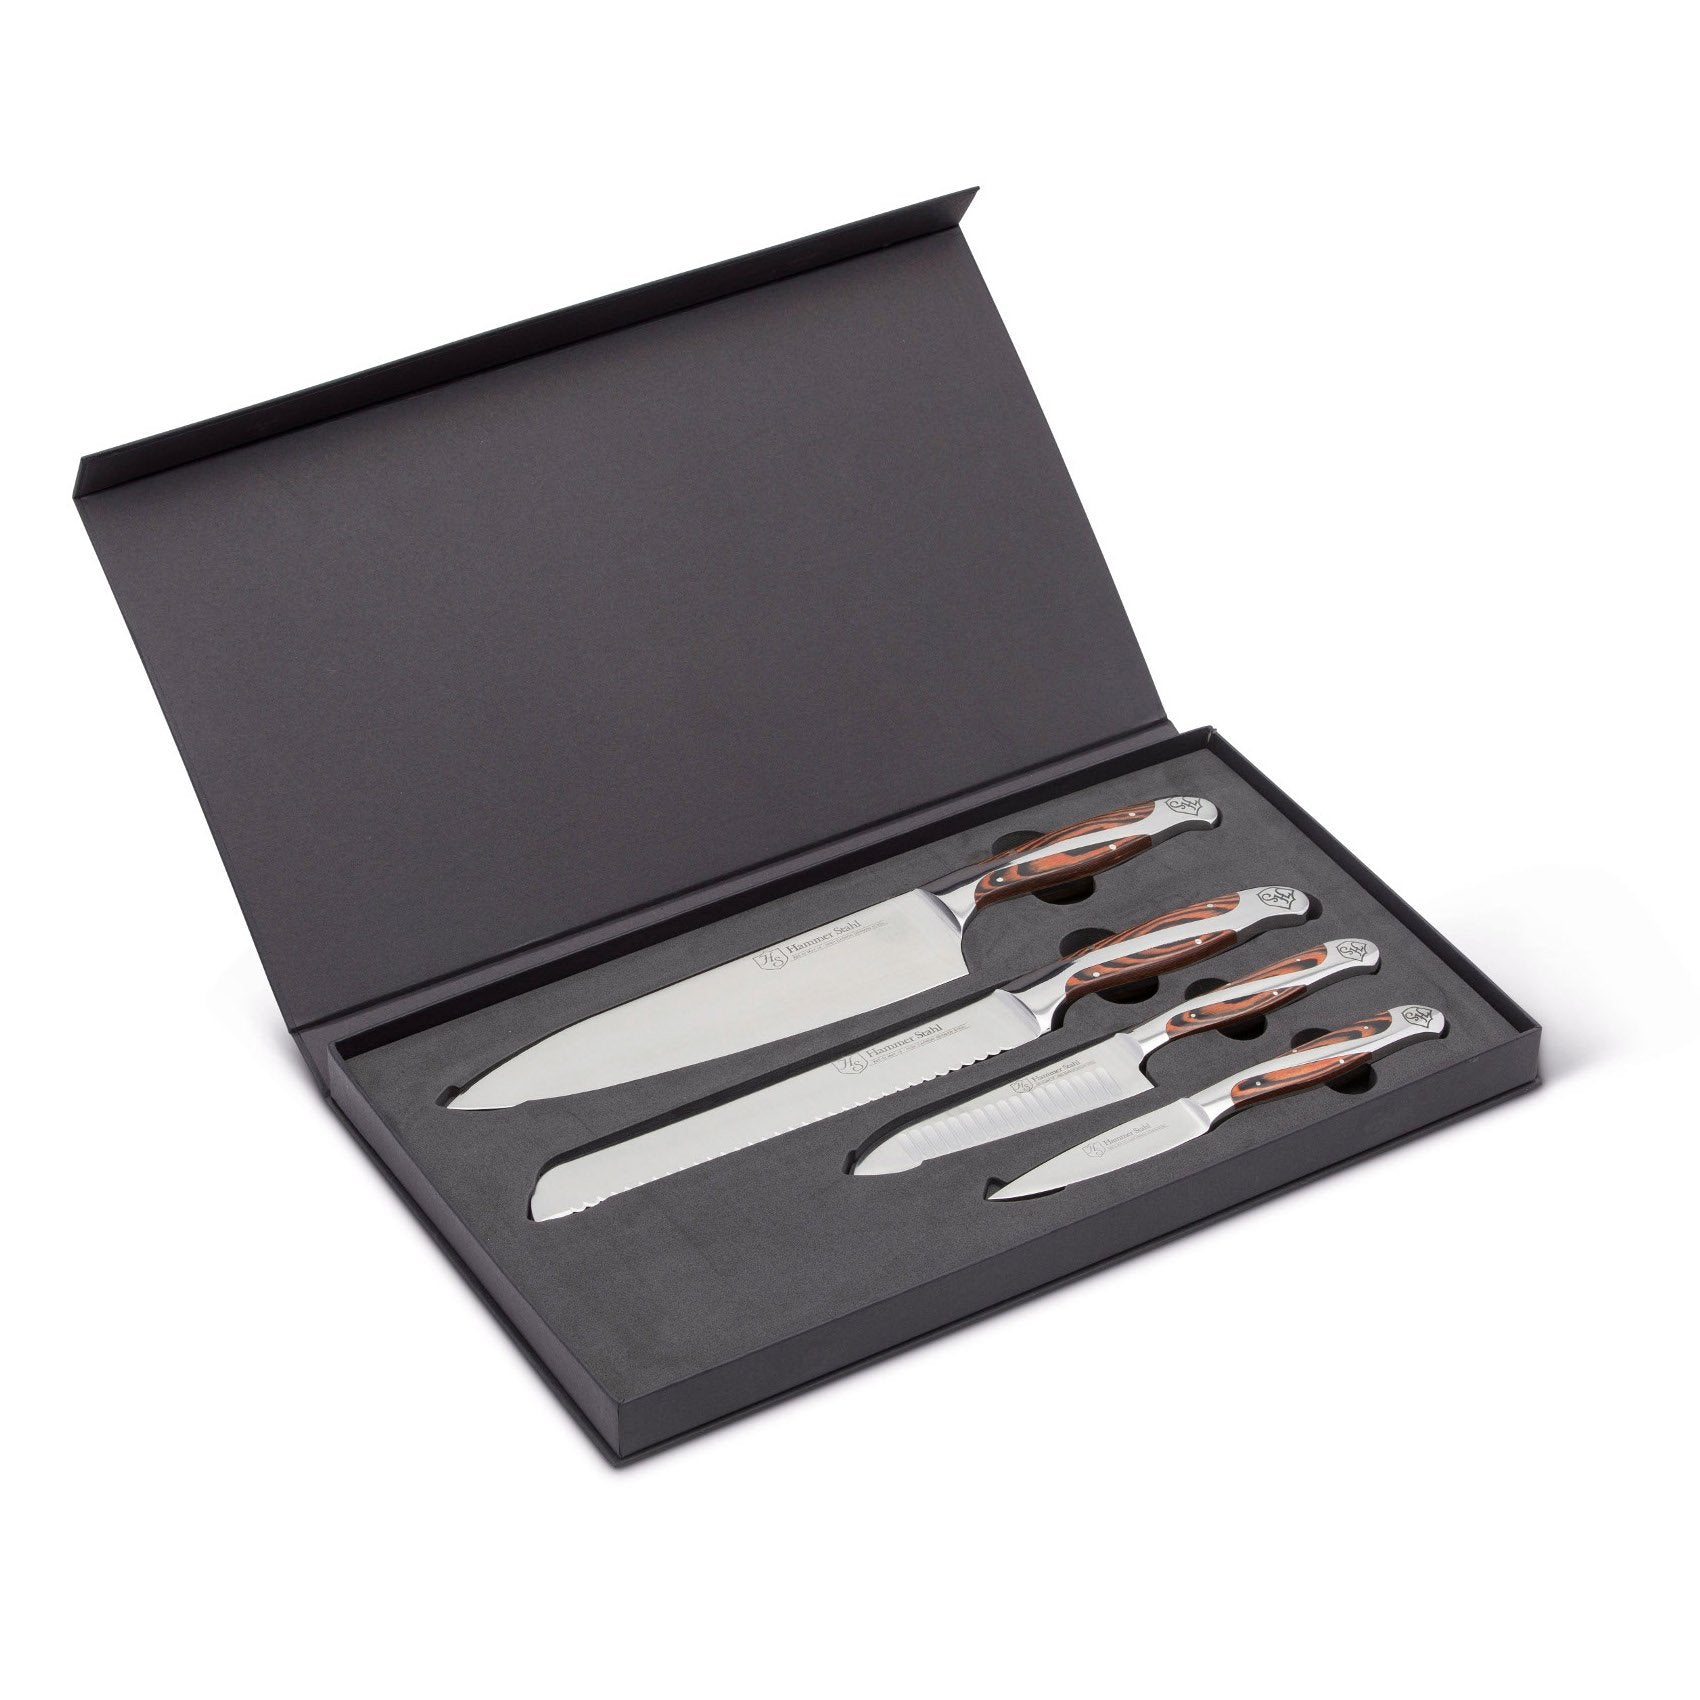 The Victorinox 4-Piece Utility Knife Set Is Just $19 at